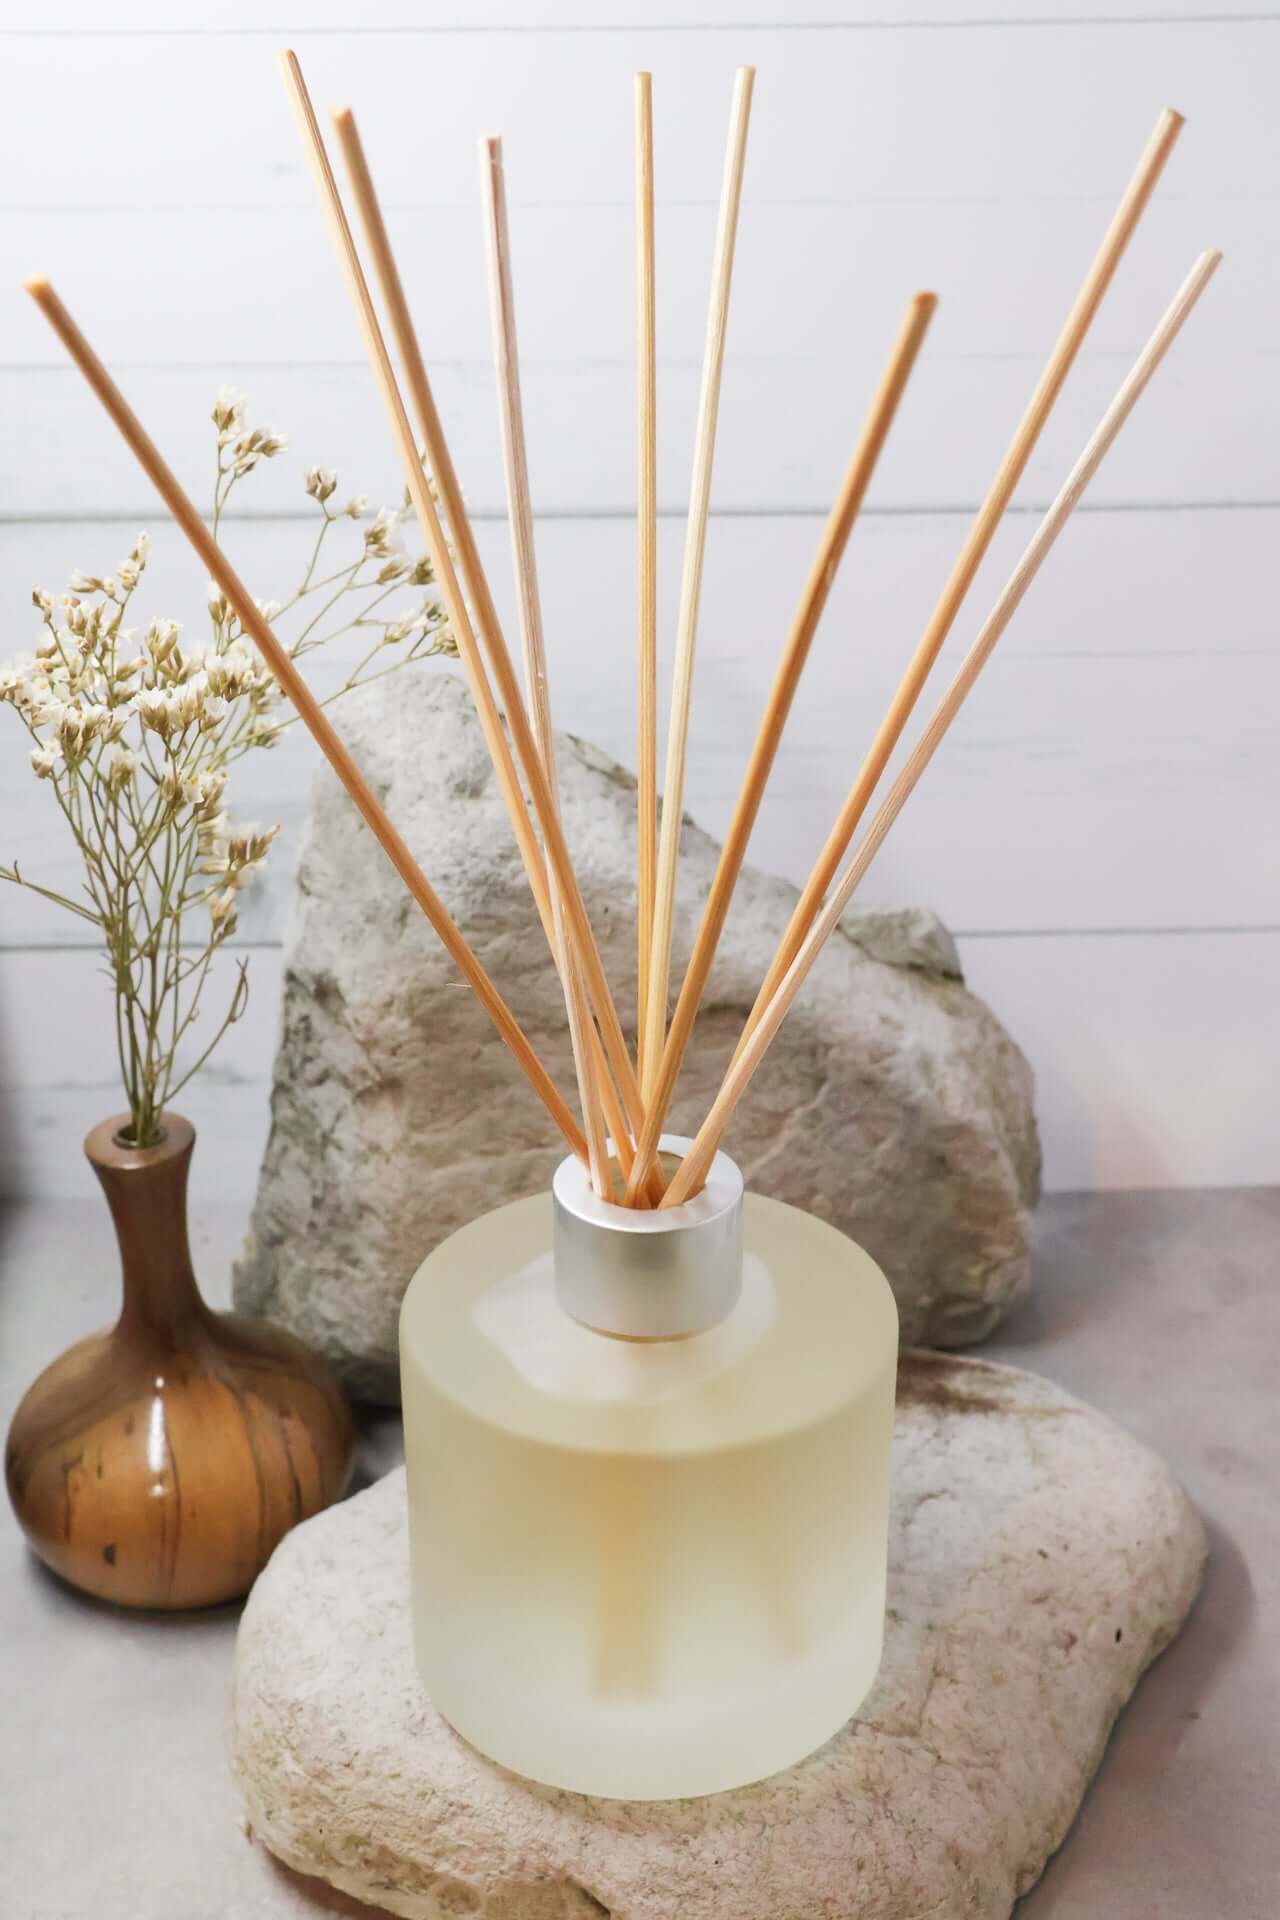 Crystal infused diffuser with wicks of the fragrance Blood Orange and Goji Berry